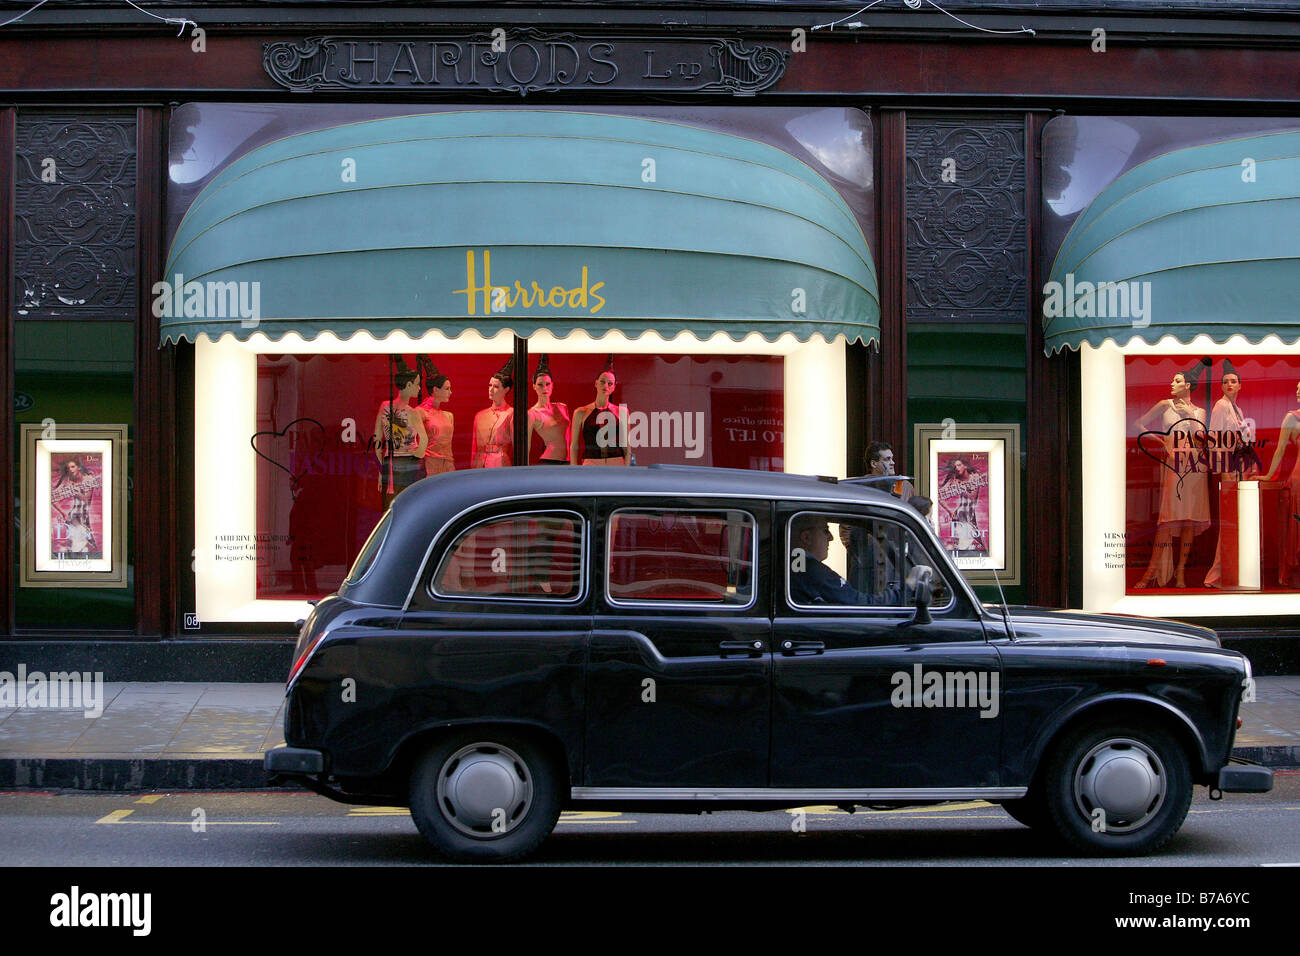 Taxi in front of a shop window of Harrods department store, London, England, Great Britain, Europe Stock Photo